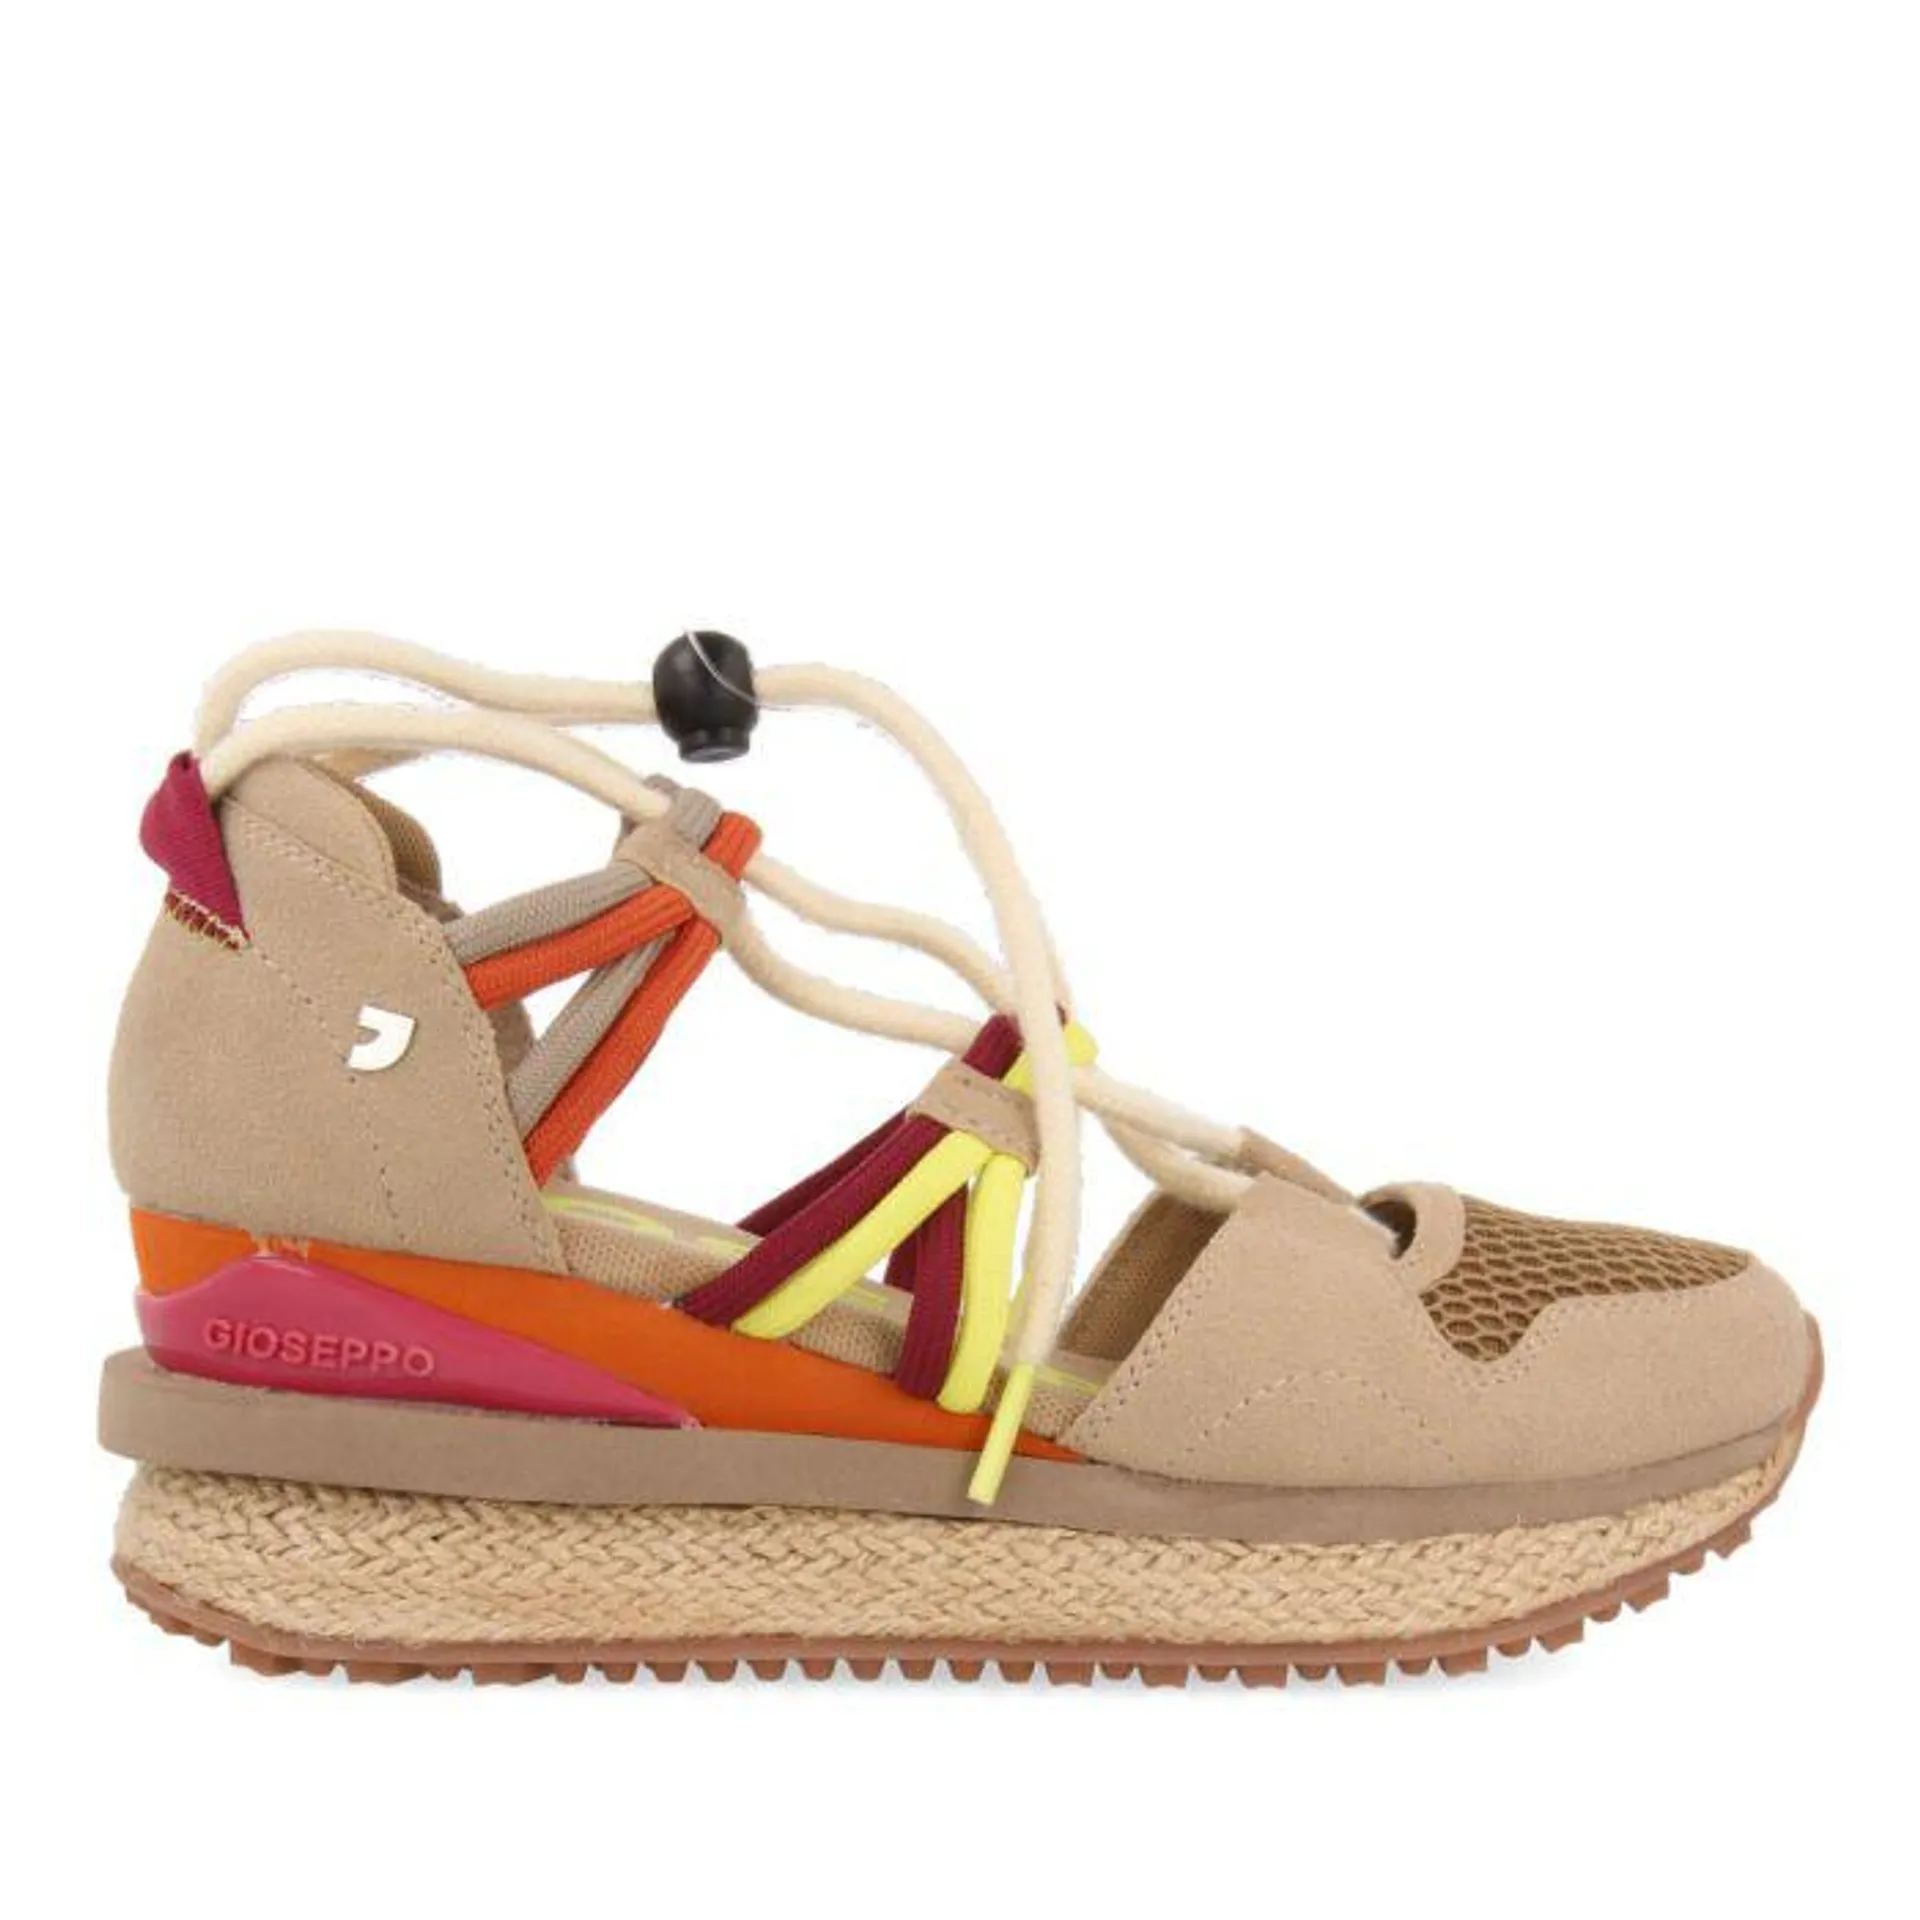 Tulare beige espadrille sneakers with wedges